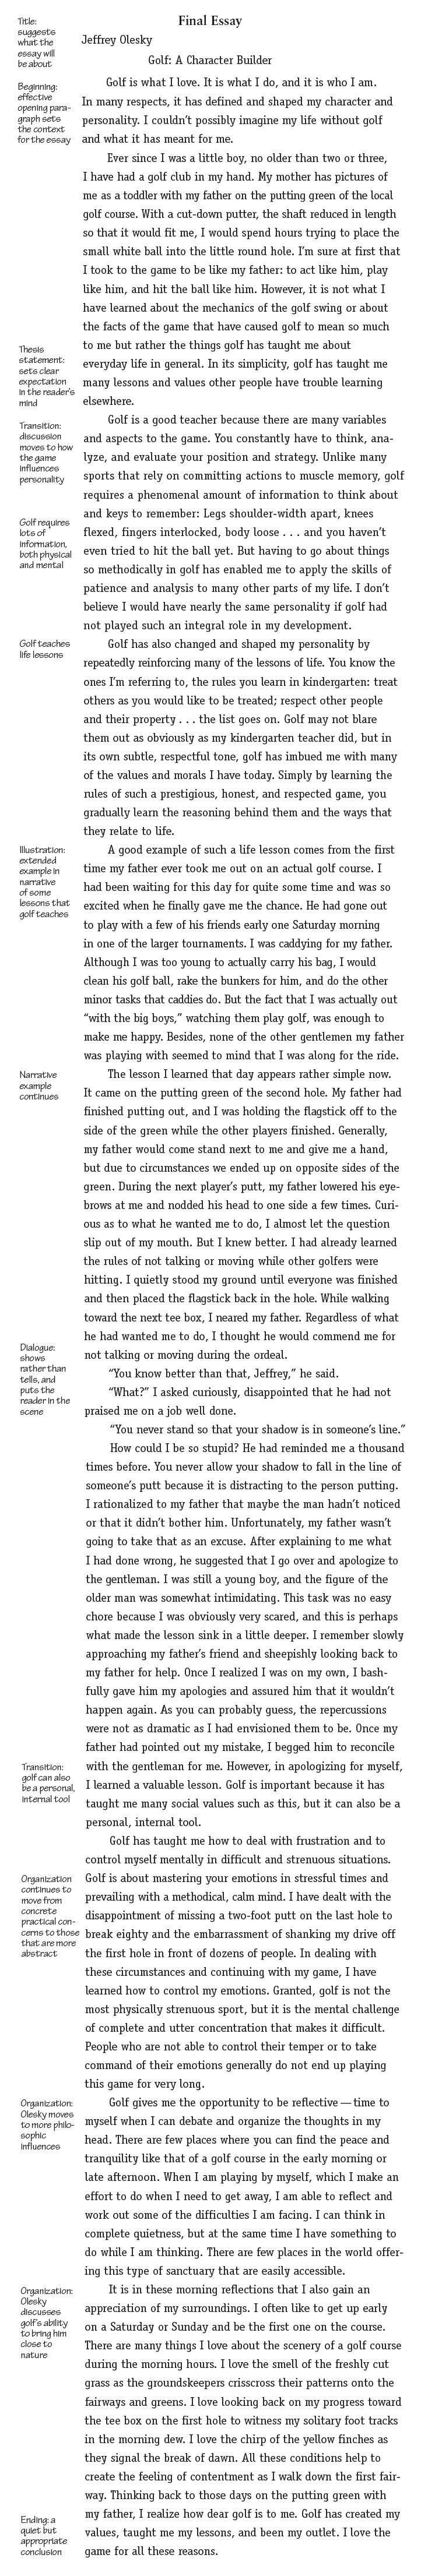 Final Essay. Jeffrey Olesky.  Text structure. Title: suggests what the essay will be about.  Title. Golf: A Character Builder.  Text structure. Beginning: effective opening paragraph sets the context for the essay.  Golf is what I love. It is what I do, and it is who I am. In many respects, it has defined and shaped my character and personality. I couldn't possibly imagine my life without golf and what it has meant for me.  Ever since I was a little boy, no older than two or three, I have had a golf club in my hand. My mother has pictures of me as a toddler with my father on the putting green of the local golf course. With a cut-down putter, the shaft reduced in length so that it would fit me, I would spend hours trying to place the small white ball into the little round hole. I'm sure at first that I took to the game to be like my father: to act like him, play like him, and hit the ball like him. However, it is not what I have learned about the mechanics of the golf swing or about the facts of the game that have caused golf to mean so much to me but rather the things golf has taught me about everyday life in general.  Text structure. Thesis statement: sets clear expectation in the reader's mind.  In its simplicity, golf has taught me many lessons and values other people have trouble learning elsewhere.  Text structure. Transition: discussion moves to how the game influences personality. Golf requires lots of information, both physical and mental.  Golf is a good teacher because there are many variables and aspects to the game. You constantly have to think, analyze, and evaluate your position and strategy. Unlike many sports that rely on committing actions to muscle memory, golf requires a phenomenal amount of information to think about and keys to remember: Legs shoulder-width apart, knees flexed, fingers interlocked, body loose… and you haven't even tried to hit the ball yet. But having to go about things so methodically in golf has enabled me to apply the skills of patience and analysis to many other parts of my life. I don't believe I would have nearly the same personality if golf had not played such an integral role in my development.  Text structure. Golf teaches life lessons.  Golf has also changed and shaped my personality by repeatedly reinforcing many of the lessons of life. You know the ones I'm referring to, the rules you learn in kindergarten: treat others as you would like to be treated; respect other people and their property… the list goes on. Golf may not blare them out as obviously as my kindergarten teacher did, but in its own subtle, respectful tone, golf has imbued me with many of the values and morals I have today. Simply by learning the rules of such a prestigious, honest, and respected game, you gradually learn the reasoning behind them and the ways that they relate to life.  Text structure. Illustration: extended example in narrative of some lessons that golf teaches.  A good example of such a life lesson comes from the first time my father ever took me out on an actual golf course. I had been waiting for this day for quite some time and was so excited when he finally gave me the chance. He had gone out to play with a few of his friends early one Saturday morning in one of the larger tournaments. I was caddying for my father. Although I was too young to actually carry his bag, I would clean his golf ball, rake the bunkers for him, and do the other minor tasks that caddies do. But the fact that I was actually out with the big boys, watching them  play golf, was enough to make me happy. Besides, none of the other gentlemen my father was playing with seemed to mind that I was along for the ride.  Text structure. Narrative example continues.  The lesson I learned that day appears rather simple now. It came on the putting green of the second hole. My father had finished putting out, and I was holding the flagstick off to the side of the green while the other players finished. Generally, my father would come stand next to me and give me a hand, but due to circumstances we ended up on opposite sides of the green. During the next player's putt, my father lowered his eyebrows at me and nodded his head to one side a few times. Curious as to what he wanted me to do, I almost let the question slip out of my mouth. But I knew better. I had already learned the rules of not talking or moving while other golfers were hitting. I quietly stood my ground until everyone was finished and then placed the flagstick back in the hole. While walking toward the next tee box, I neared my father. Regardless of what he had wanted me to do, I thought he would commend me for not talking or moving during the ordeal.  Text structure. Dialogue: shows rather than tells, and puts the reader in the scene.  You know better than that, Jeffrey, he said. What? I asked curiously, disappointed that he had not praised me on a job well done.  You never stand so that your shadow is in someone's line.  How could I be so stupid? He had reminded me a thousand times before. You never allow your shadow to fall in the line of someone's putt because it is distracting to the person putting. I rationalized to my father that maybe the man hadn't noticed or that it didn't bother him. Unfortunately, my father wasn't going to take that as an excuse. After explaining to me what I had done wrong, he suggested that I go over and apologize to the gentleman. I was still a young boy, and the figure of the older man was somewhat intimidating. This task was no easy chore because I was obviously very scared, and this is perhaps what made the lesson sink in a little deeper. I remember slowly approaching my father’s friend and sheepishly looking back to my father for help. Once I realized I was on my own, I bashfully gave him my apologies and assured him that it wouldn't happen again. As you can probably guess, the repercussions were not as dramatic as I had envisioned them to be. Once my father had pointed out my mistake, I begged him to reconcile with the gentleman for me. However, in apologizing for myself, learned a valuable lesson. Golf is important because it has taught me many social values such as this, but it can also be a personal, internal tool.   Text structure. Transition: golf can also be a personal, internal tool. Organization continues to move from concrete practical concerns to those that are more abstract.  Golf has taught me how to deal with frustration and to control myself mentally in difficult and strenuous situations. Golf is about mastering your emotions in stressful times and prevailing with a methodical, calm mind. I have dealt with the disappointment of missing a two-foot putt on the last hole to break eighty and the embarrassment of shanking my drive off the first hole in front of dozens of people. In dealing with these circumstances and continuing with my game, I have learned how to control my emotions. Granted, golf is not the most physically strenuous sport, but it is the mental challenge of complete and utter concentration that makes it difficult. People who are not able to control their temper or to take command of their emotions generally do not end up playing this game for very long.  Text structure. Organization: Olesky moves to more philosophic influences.  Golf gives me the opportunity to be reflective —time to myself when I can debate and organize the thoughts in my head. There are few places where you can find the peace and tranquility like that of a golf course in the early morning or late afternoon. When I am playing by myself, which I make an effort to do when I need to get away, I am able to reflect and work out some of the difficulties I am facing. I can think in complete quietness, but at the same time I have something to do while I am thinking. There are few places in the world offering this type of sanctuary that are easily accessible.   Text structure. Organization: Olesky discusses golf's ability to bring him close to nature.  It is in these morning reflections that I also gain an appreciation of my surroundings. I often like to get up early on a Saturday or Sunday and be the first one on the course. There are many things I love about the scenery of a golf course during the morning hours. I love the smell of the freshly cut grass as the groundskeepers crisscross their patterns onto the fairways and greens. I love looking back on my progress toward the tee box on the first hole to witness my solitary foot tracks in the morning dew. I love the chirp of the yellow finches as they signal the break of dawn. All these conditions help to create the feeling of contentment as I walk down the first fairway.  Text structure. Ending: a quiet but appropriate conclusion. Thinking back to those days on the putting green with my father, I realize how dear golf is to me. Golf has created my values, taught me my lessons, and been my outlet. I love the game for all these reasons.  